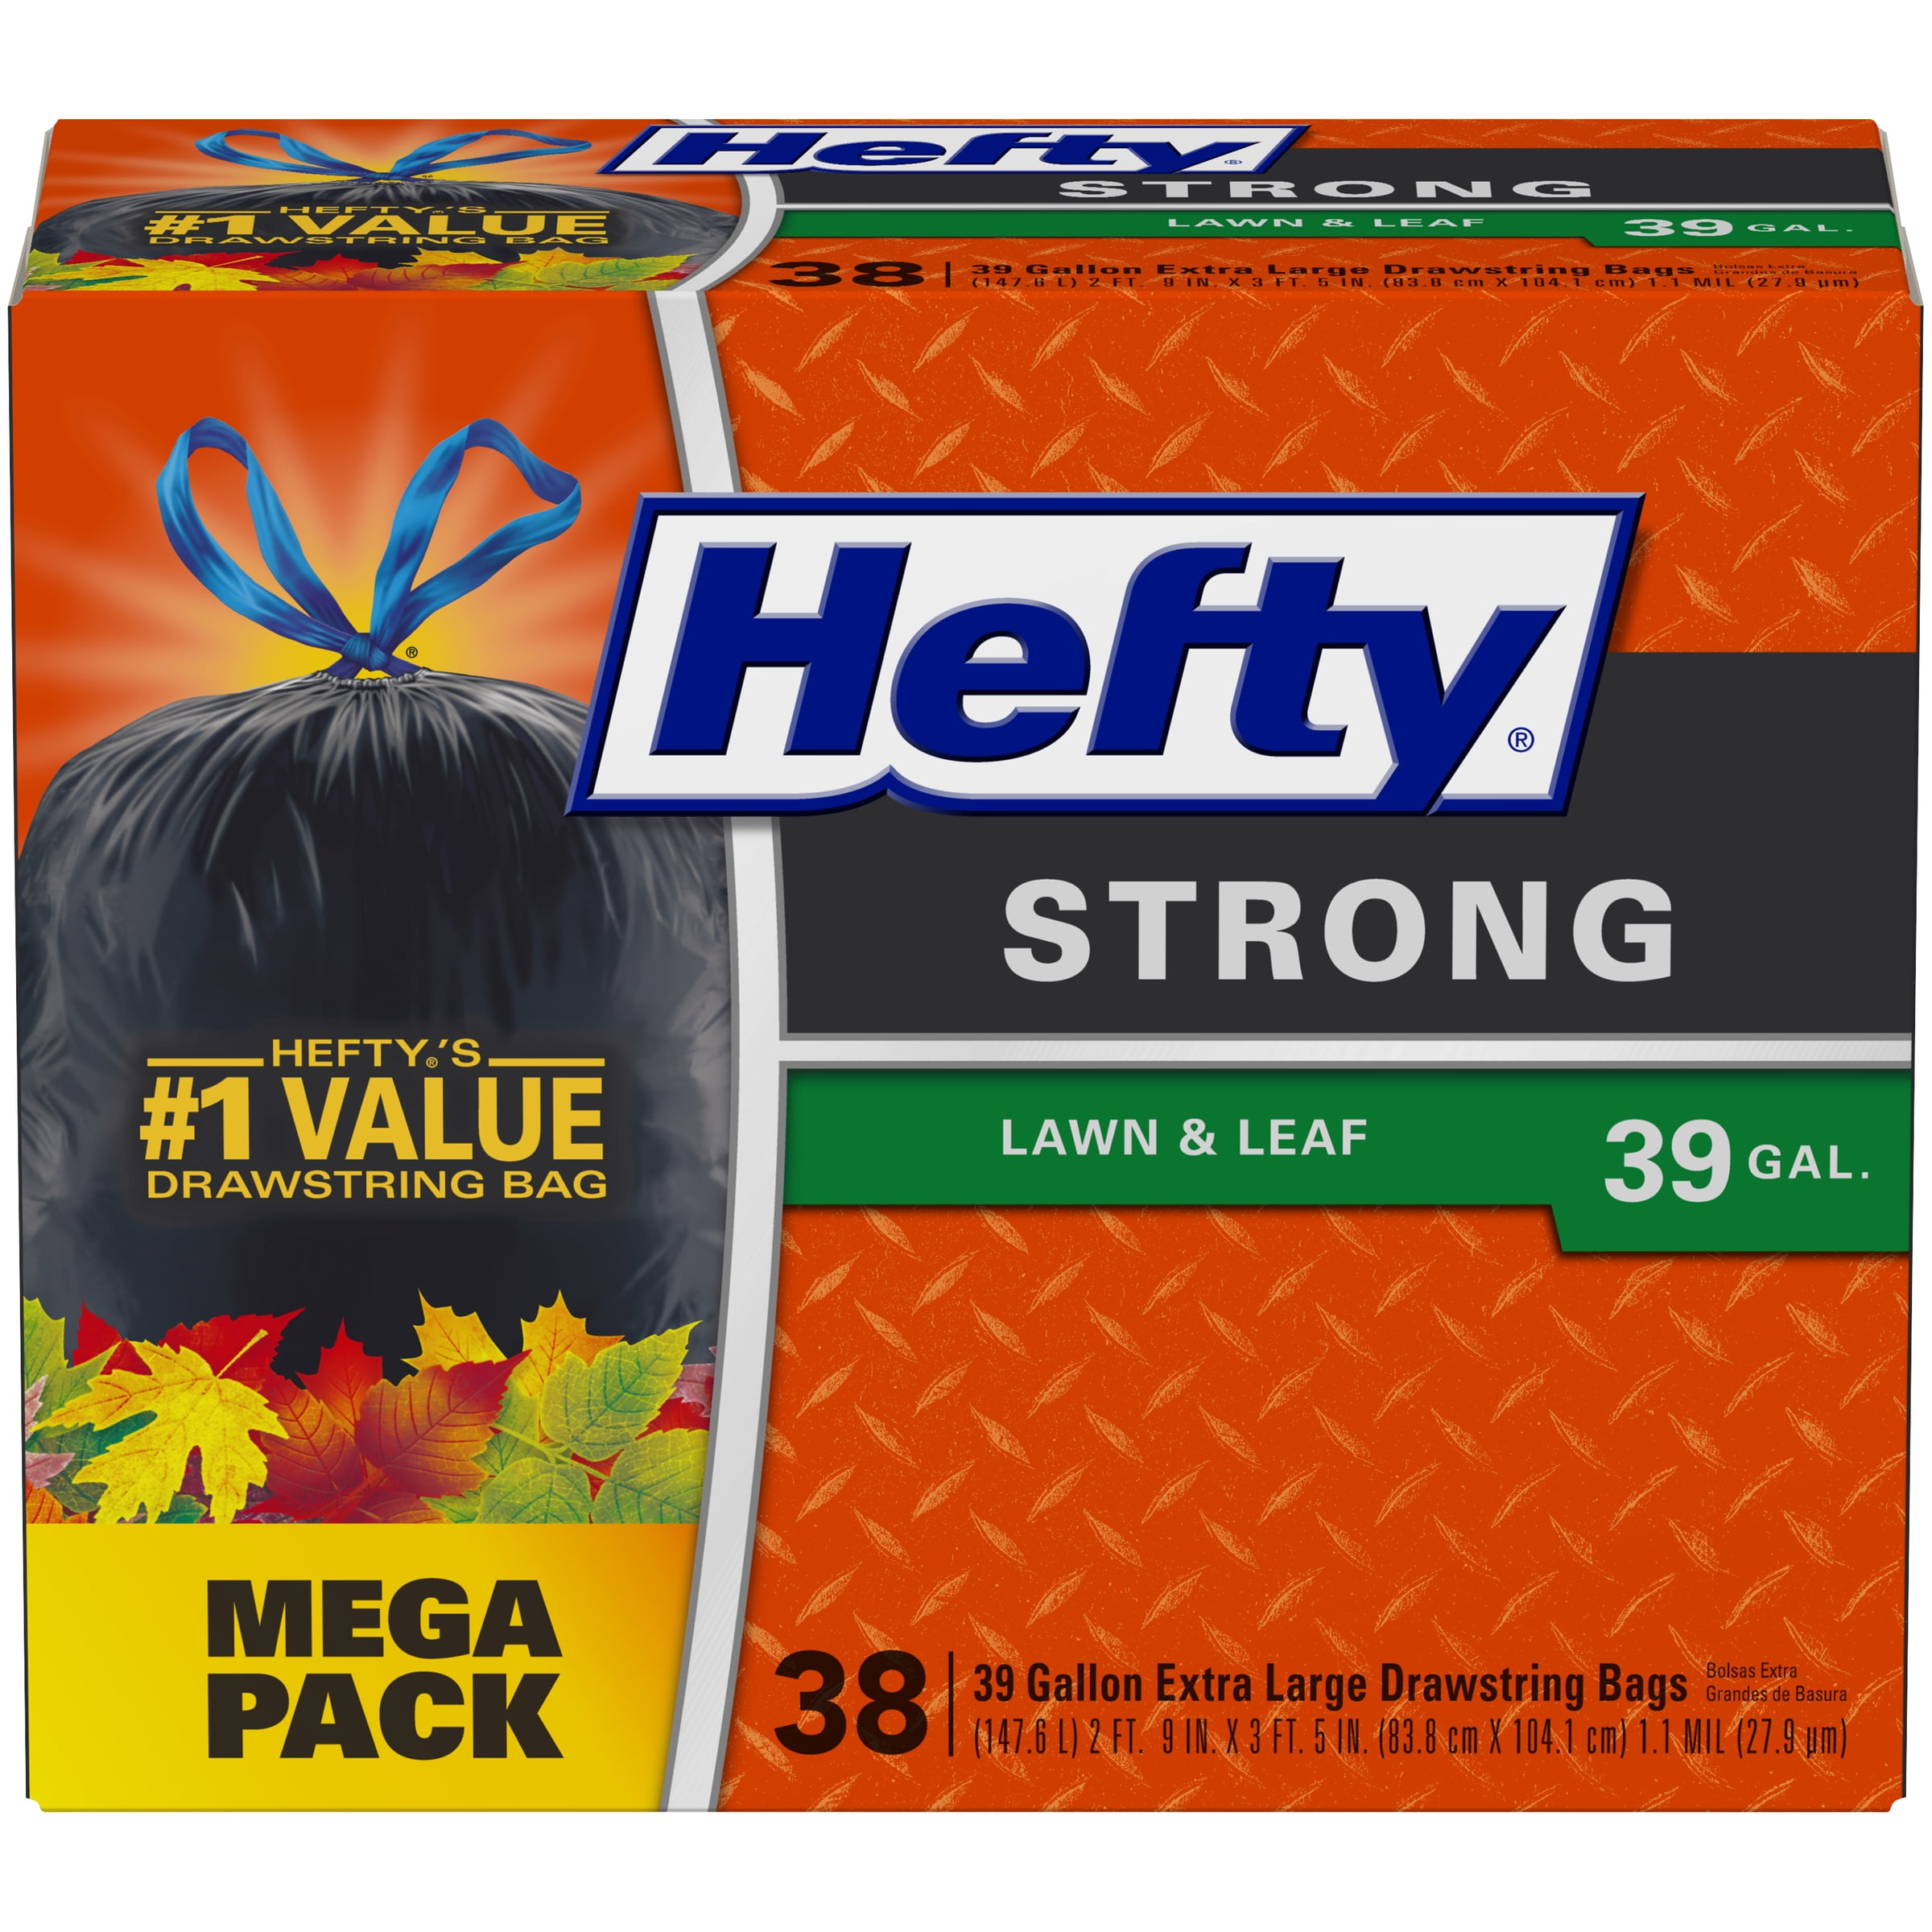 Garbage Bags Lawn and Leaf, Drawstring, 39 Gallon Hefty Strong Large Trash 